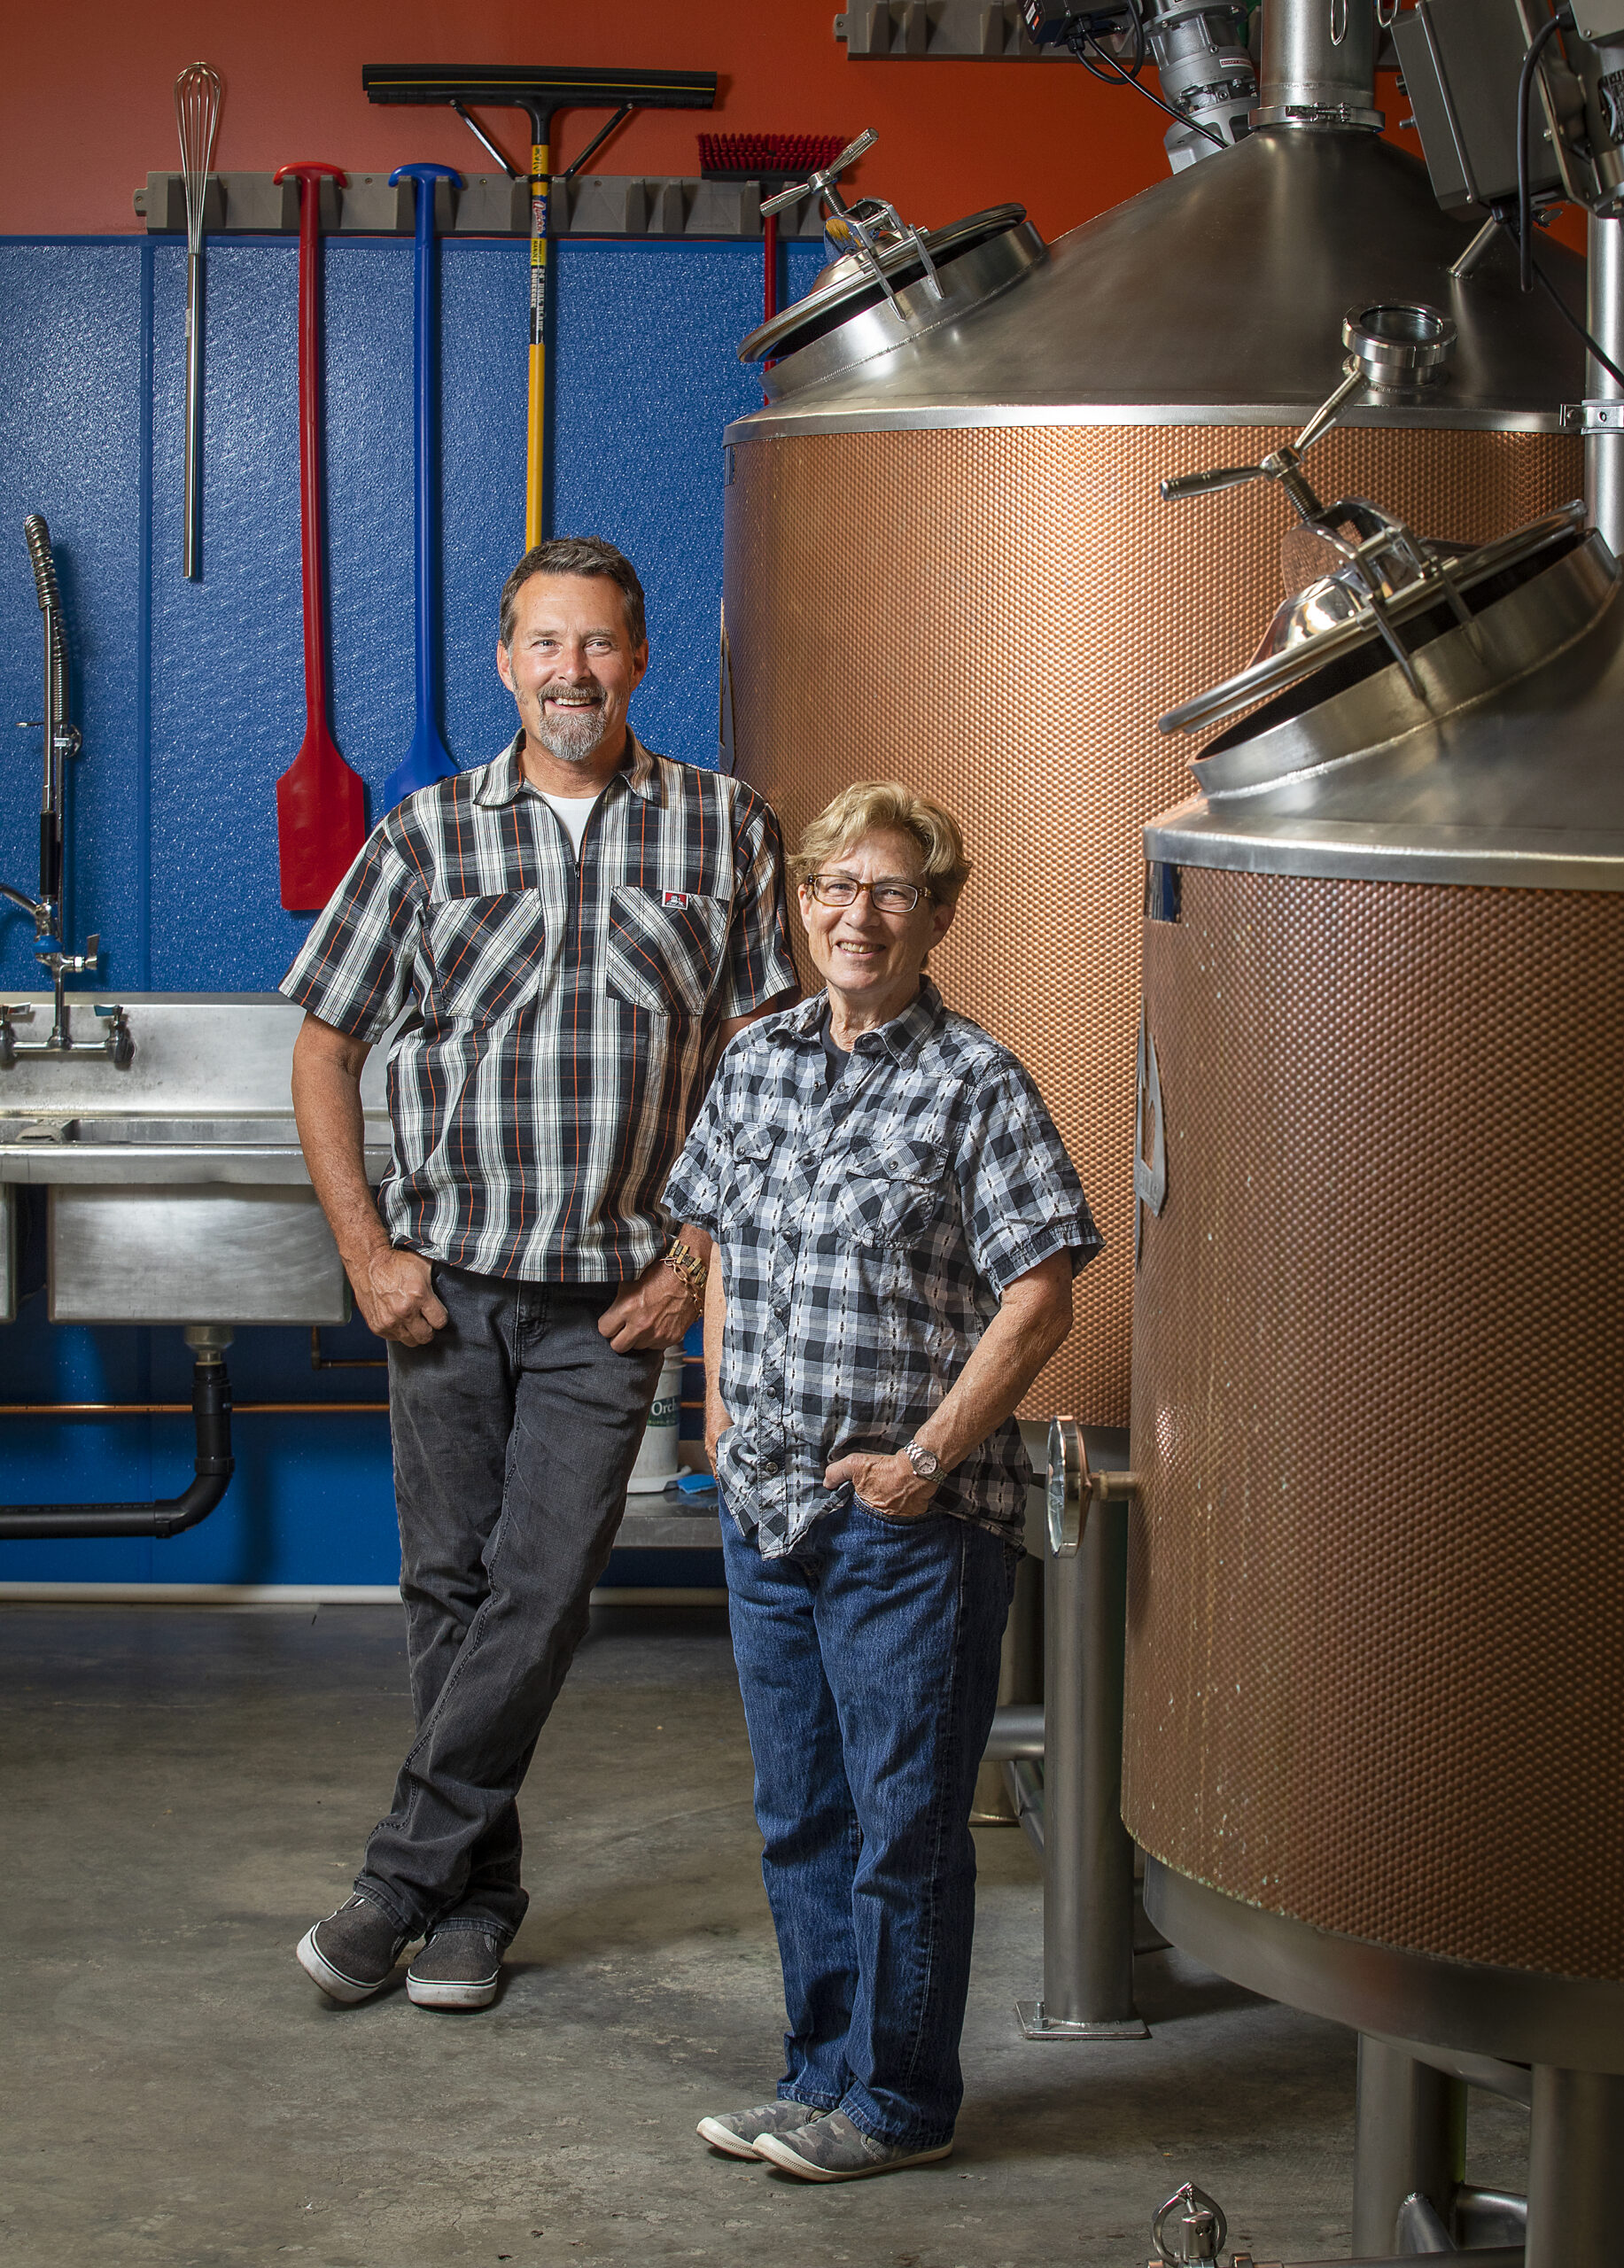 Gail Carpenter, right, and Scott Woodson, owners of Elk Fence Distillery, make Fir Top Gin, The Briny Deep Whiskey and White Elk Vodka in the only distillery in Santa Rosa, (John Burgess / The Press Democrat)